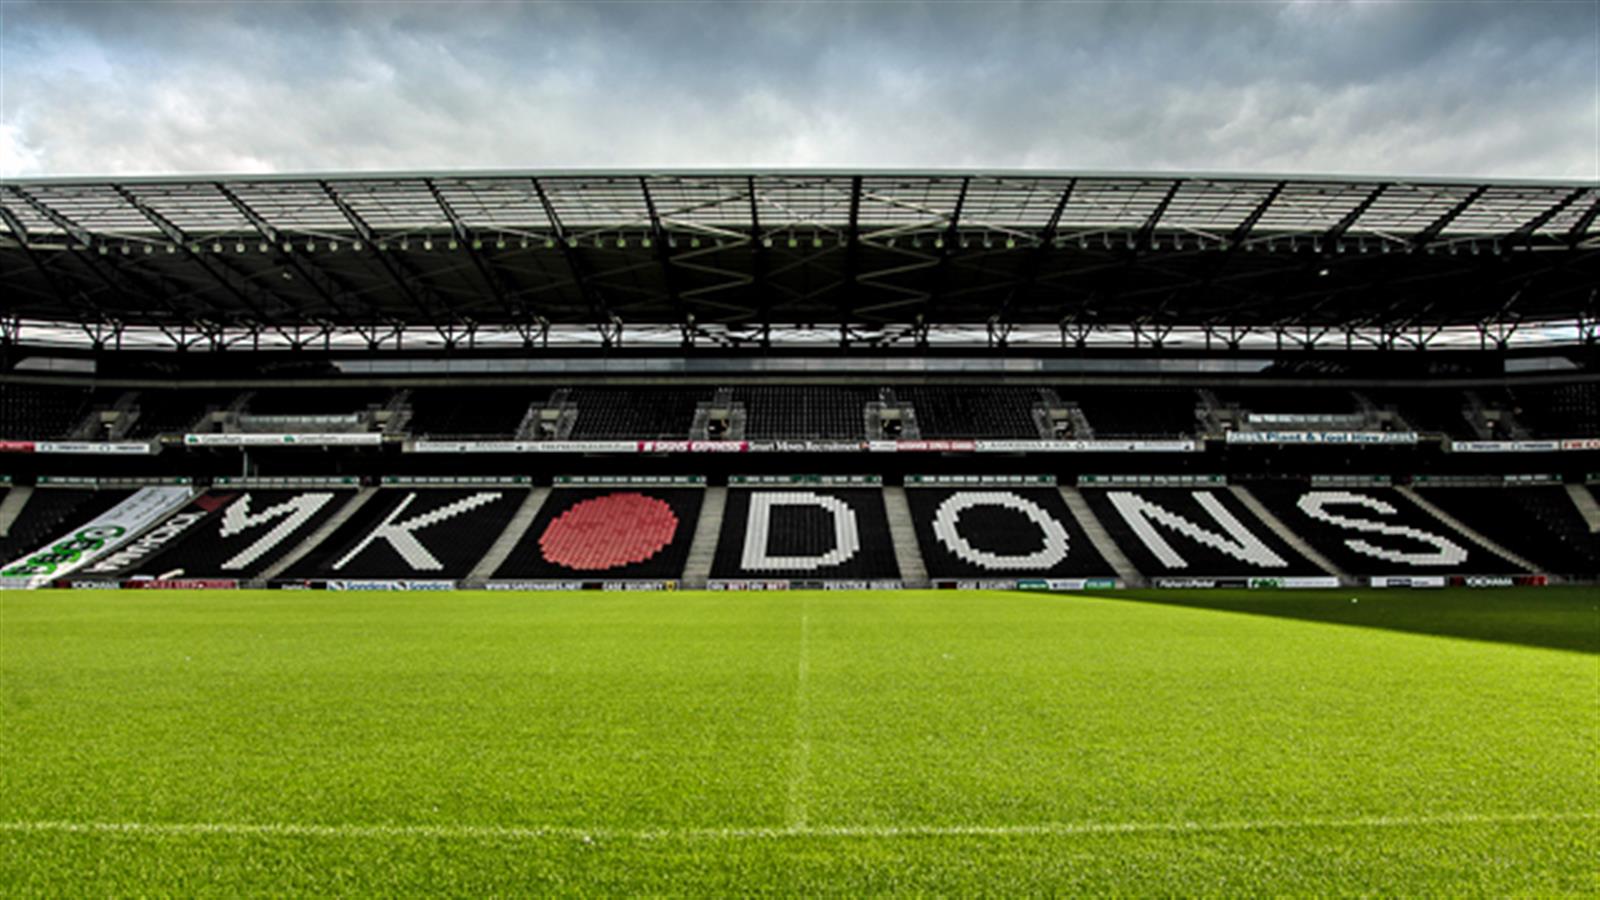 MK Dons travel and ticket information